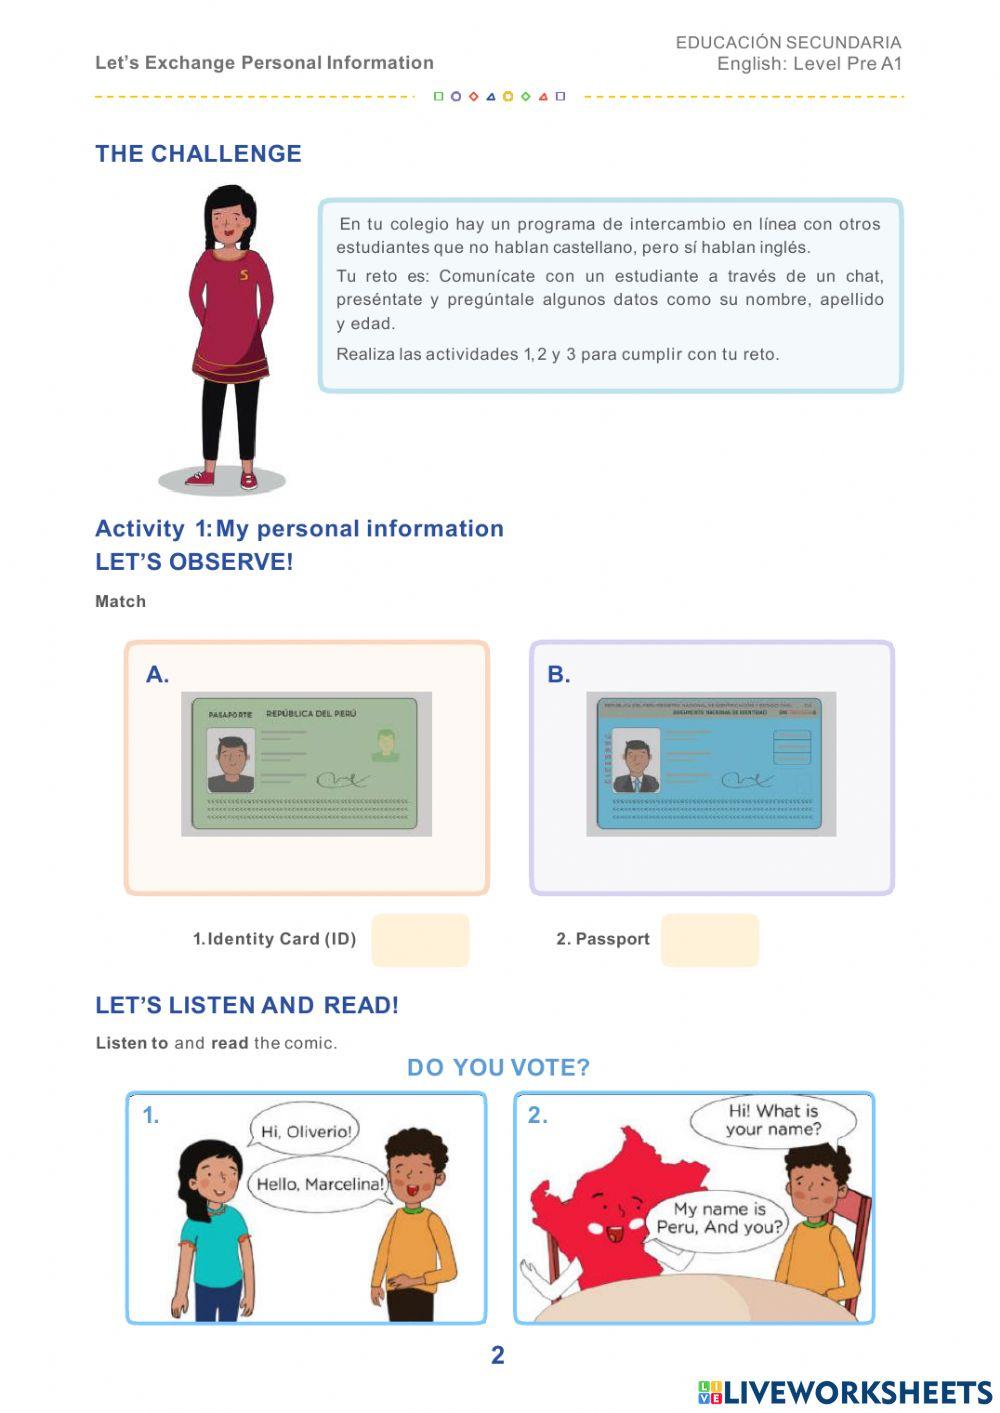 Activity 1: My Personal Information